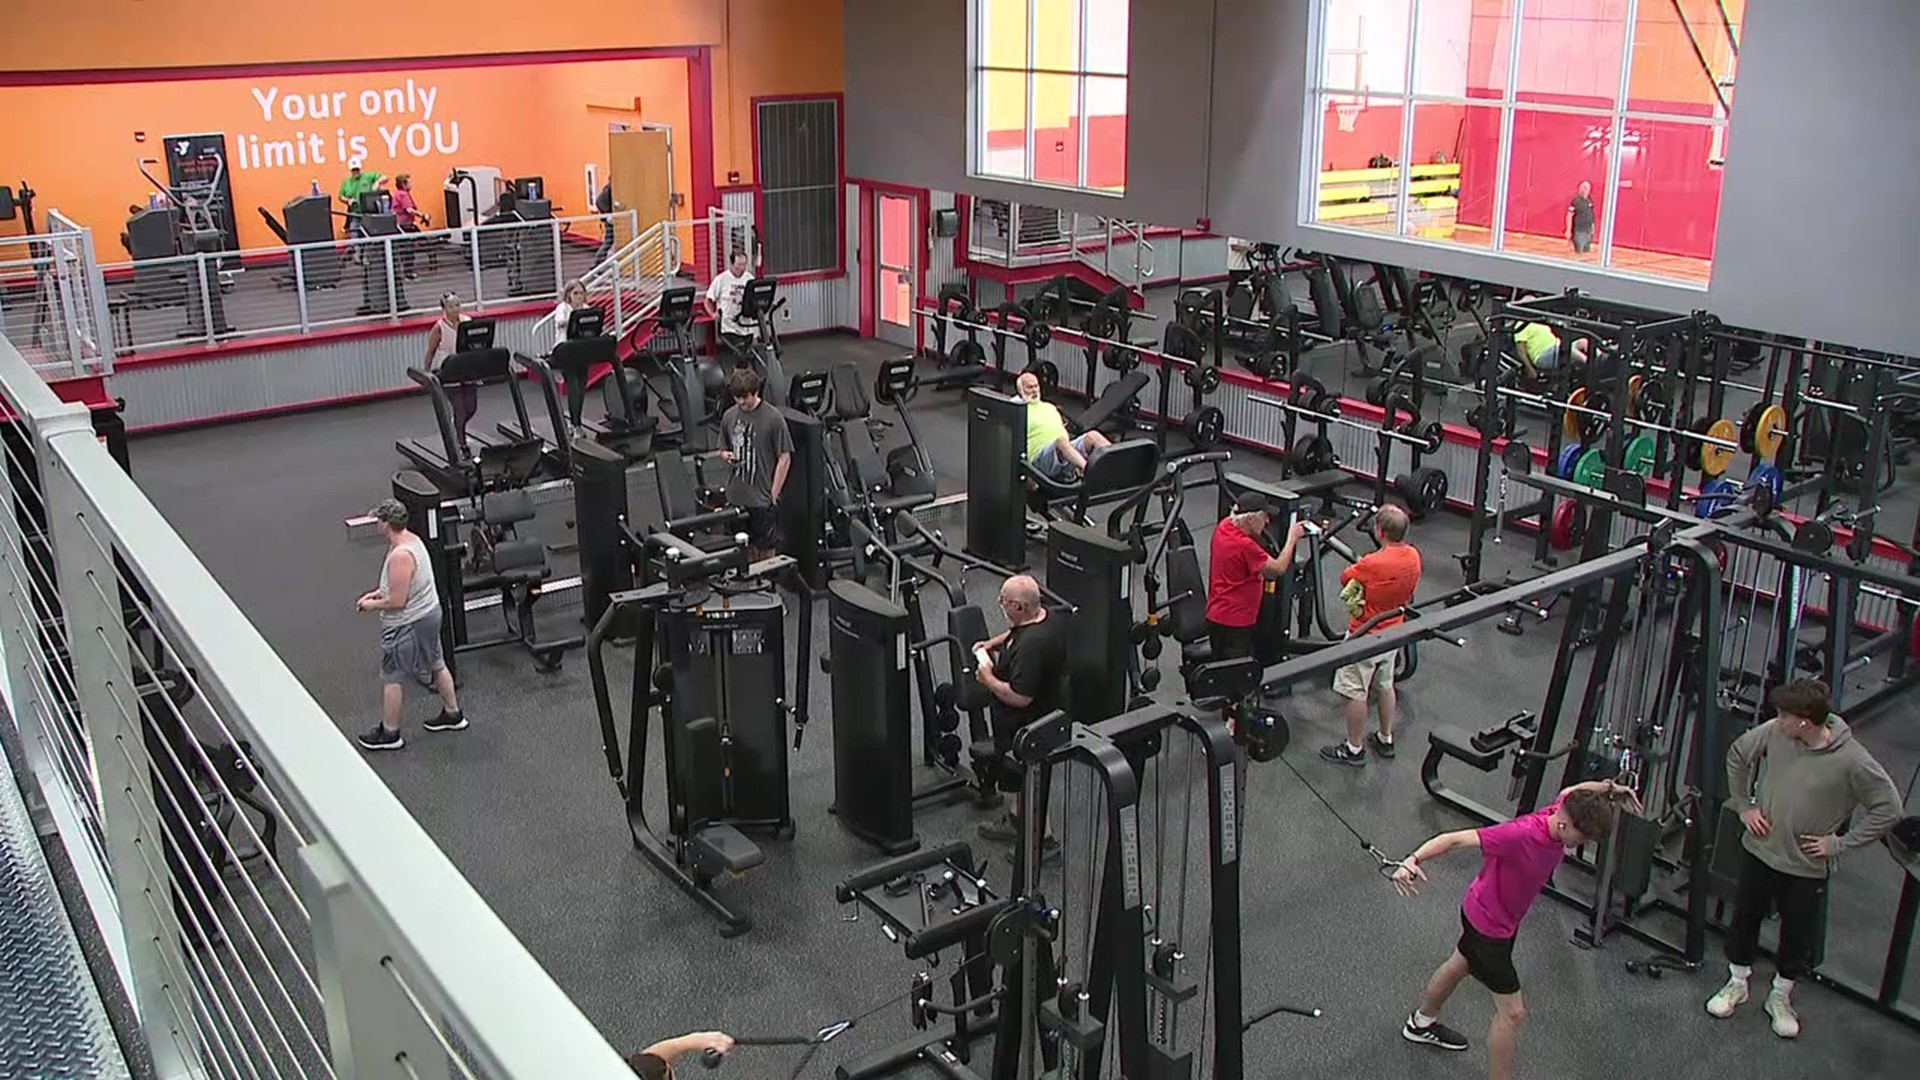 The YMCA has a new state-of-the-art fitness center and gymnasium. Newswatch 16's Nikki Krize shows us around.